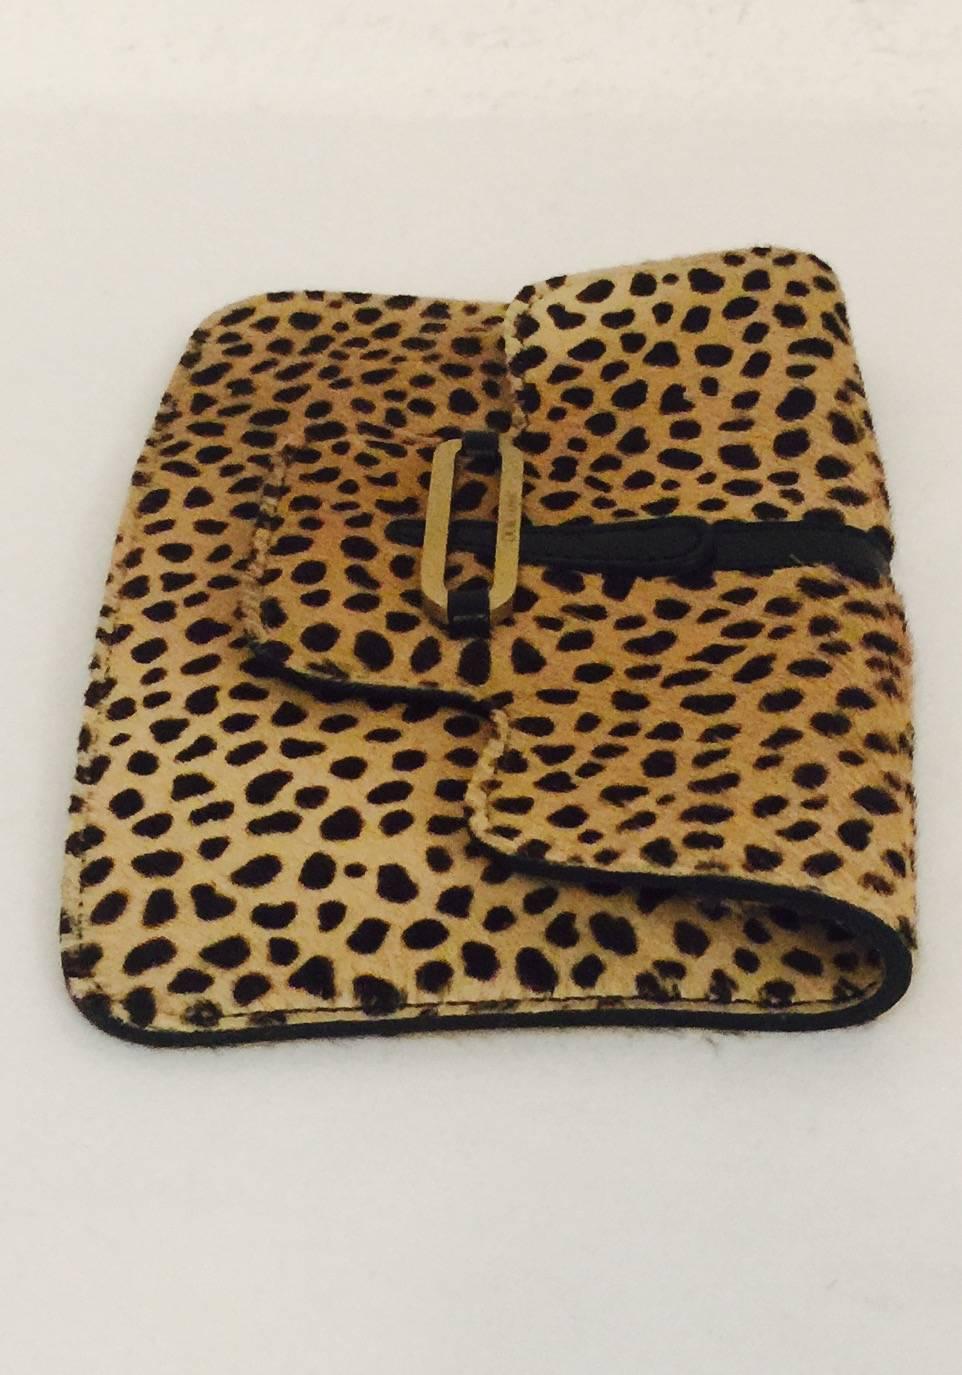 Leopard Print Pochette proves that Jimmy Choo is so much more than just shoes!  Features exquisite calf hair, gold tone hardware bearing signature logo and flap with snap closure.  Leather and nylon interior houses one zippered comparment under